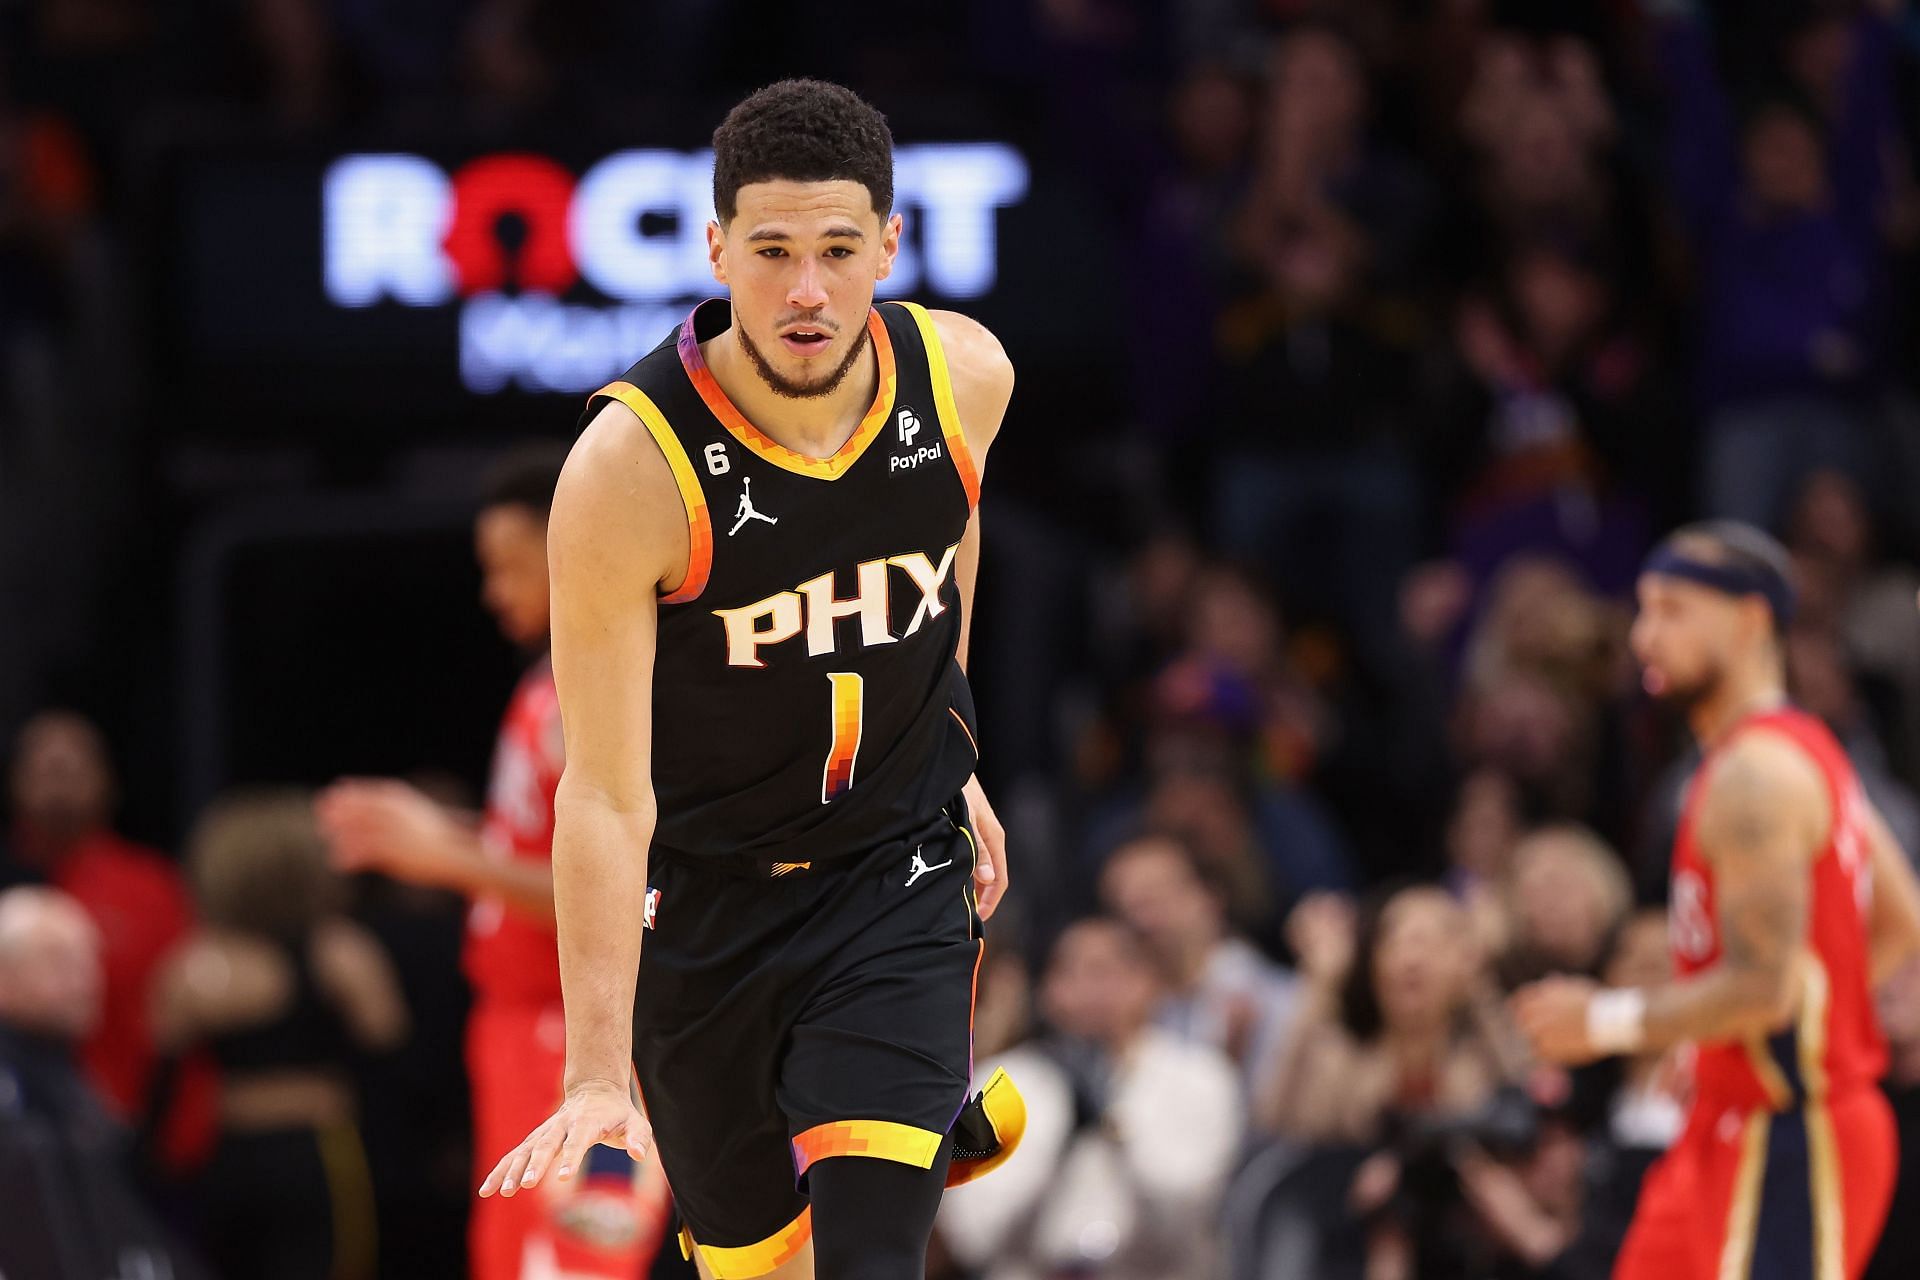 Three-time NBA All-Star Devin Booker will miss his third straight game for the Phoenix Suns tonight.